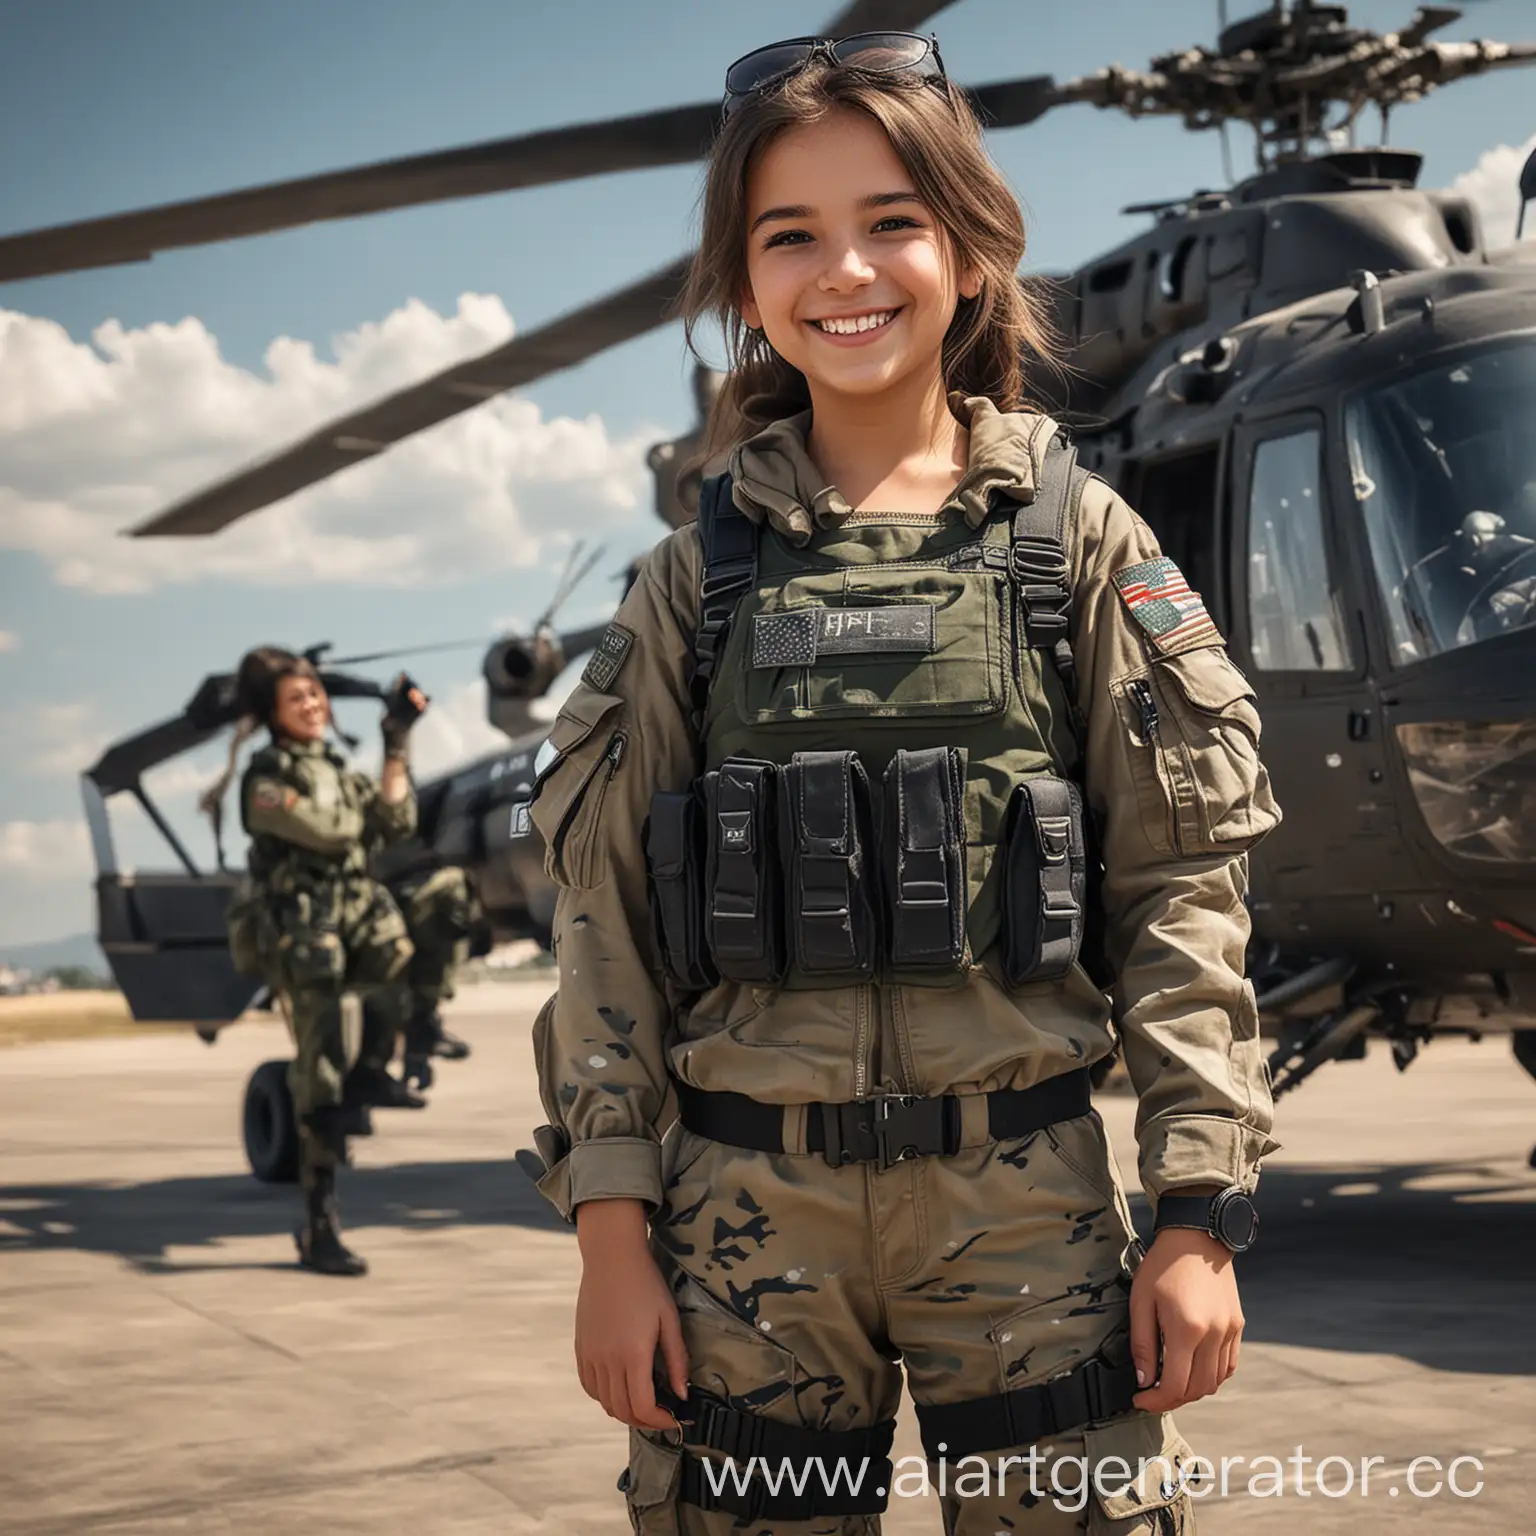 Smiling-Teenage-Girl-in-Special-Forces-Armor-with-Military-Helicopter